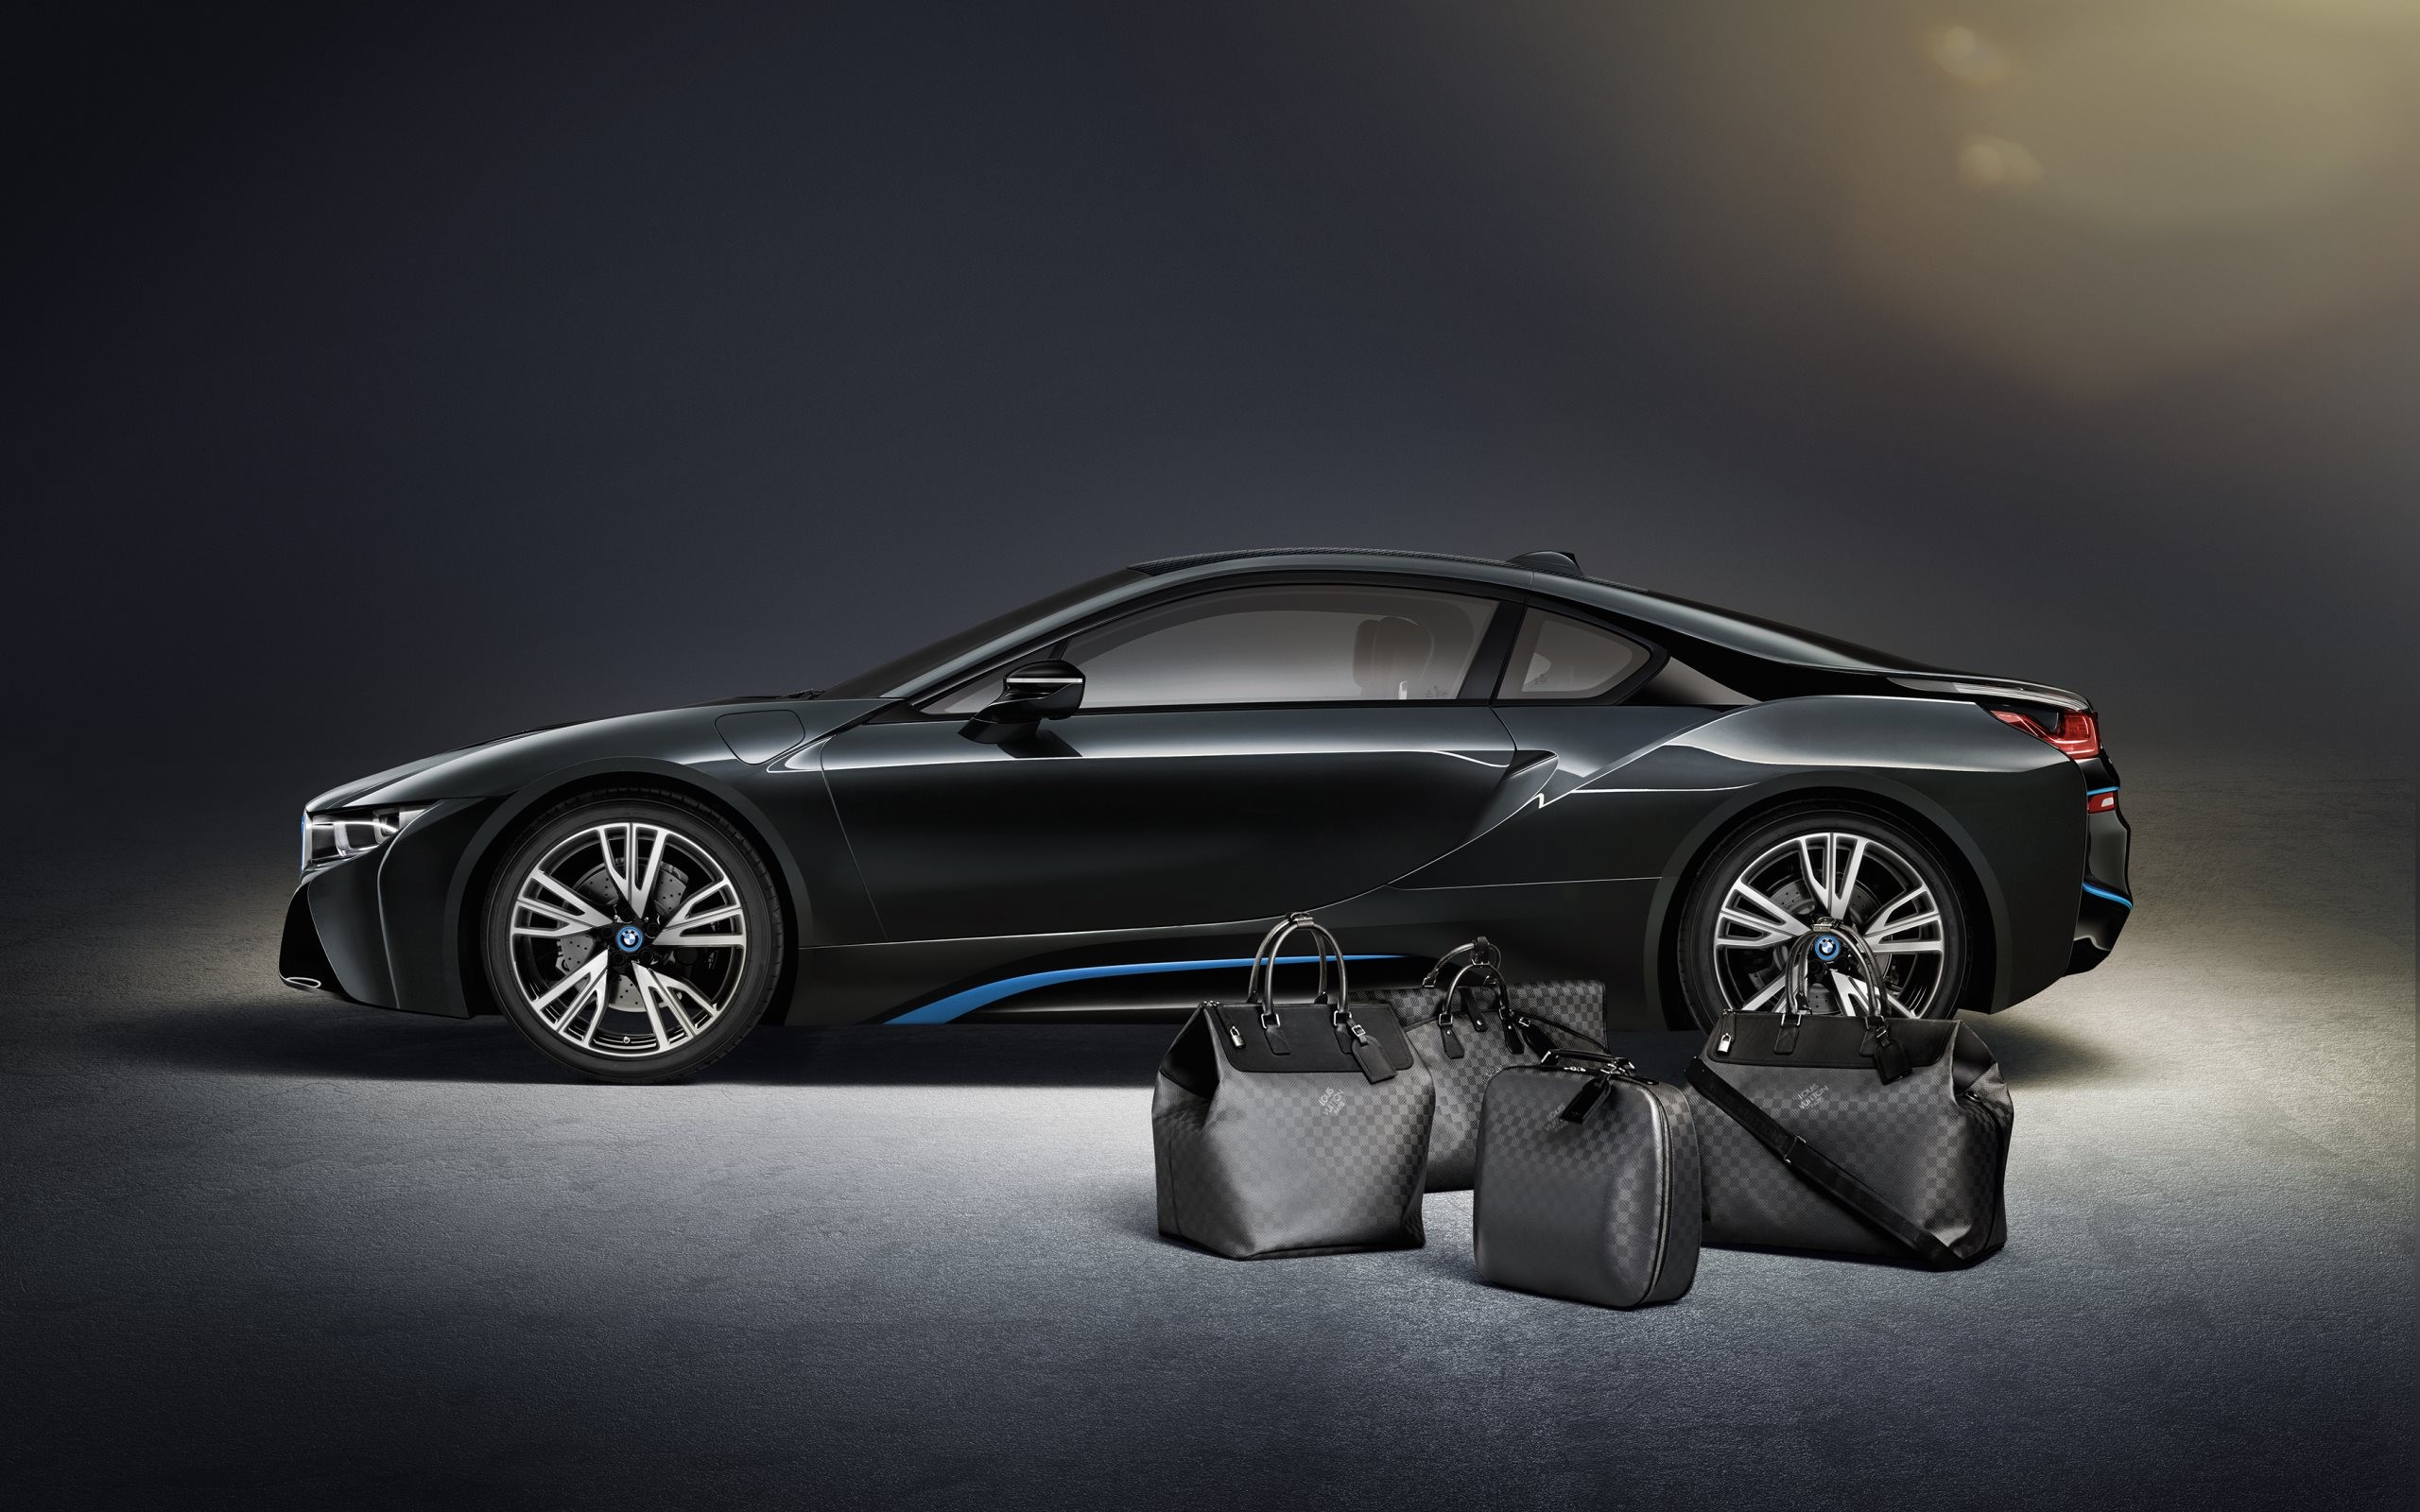 2560x1600 HD Wallpaper: Louis Vuitton luggage for the BMW i8